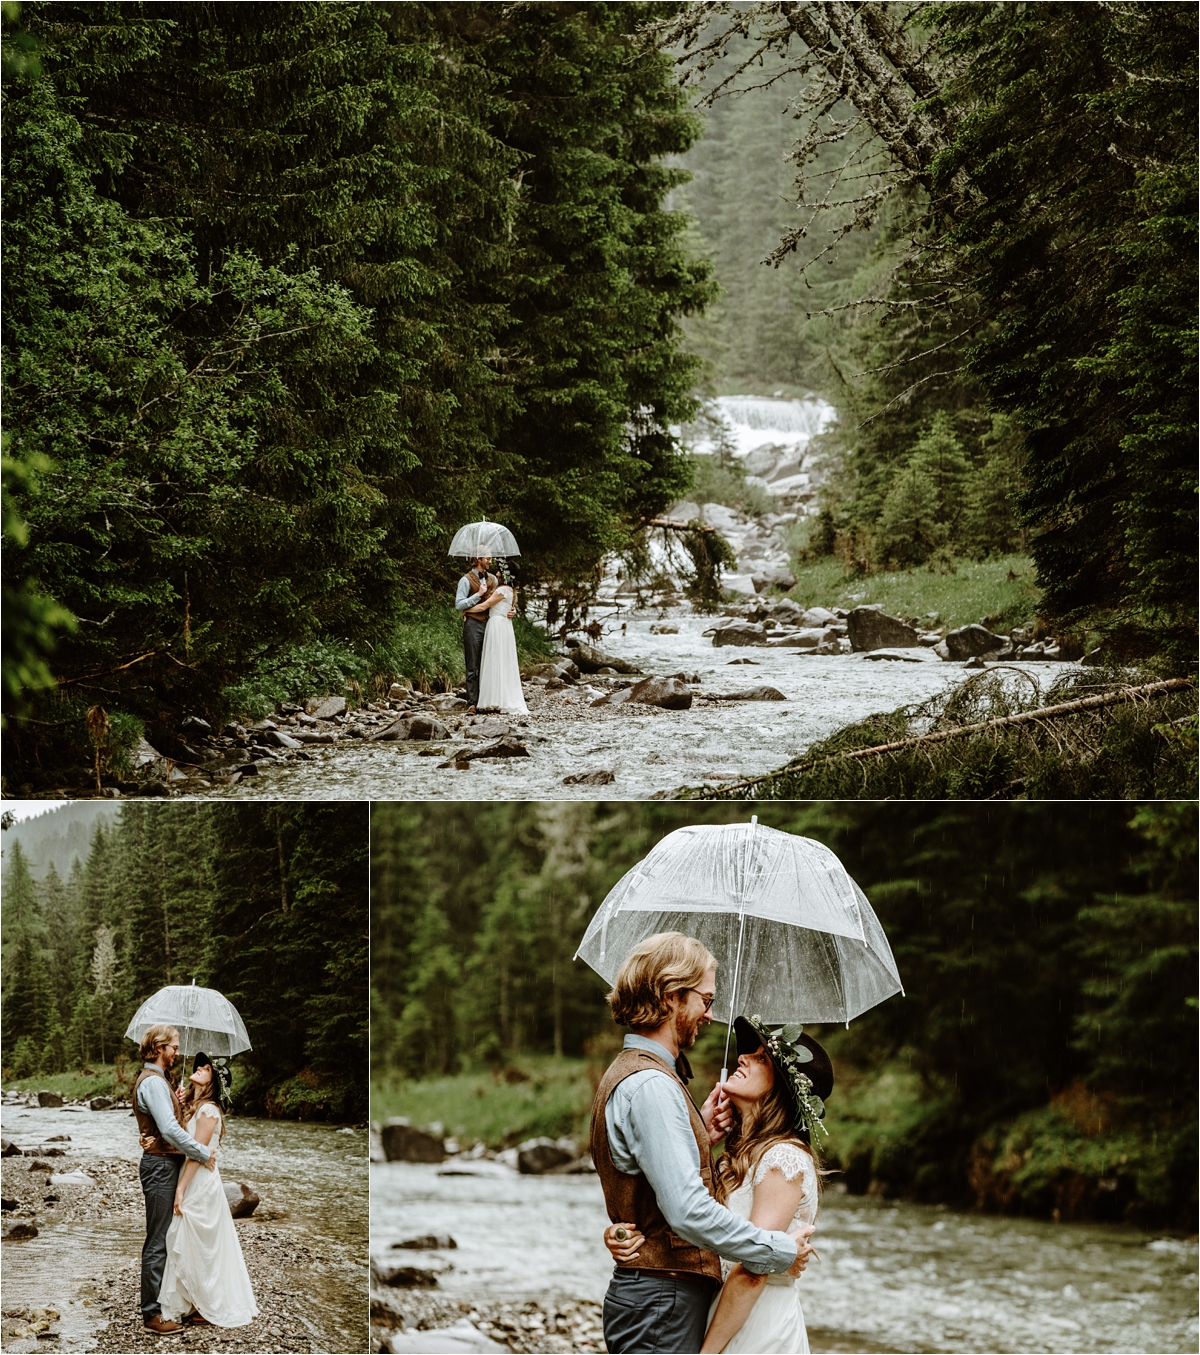 A rainy wedding day in the Dolomites, the bride and groom shelter under an umbrella next to a gushing river. Photography by Wild Connections Photography